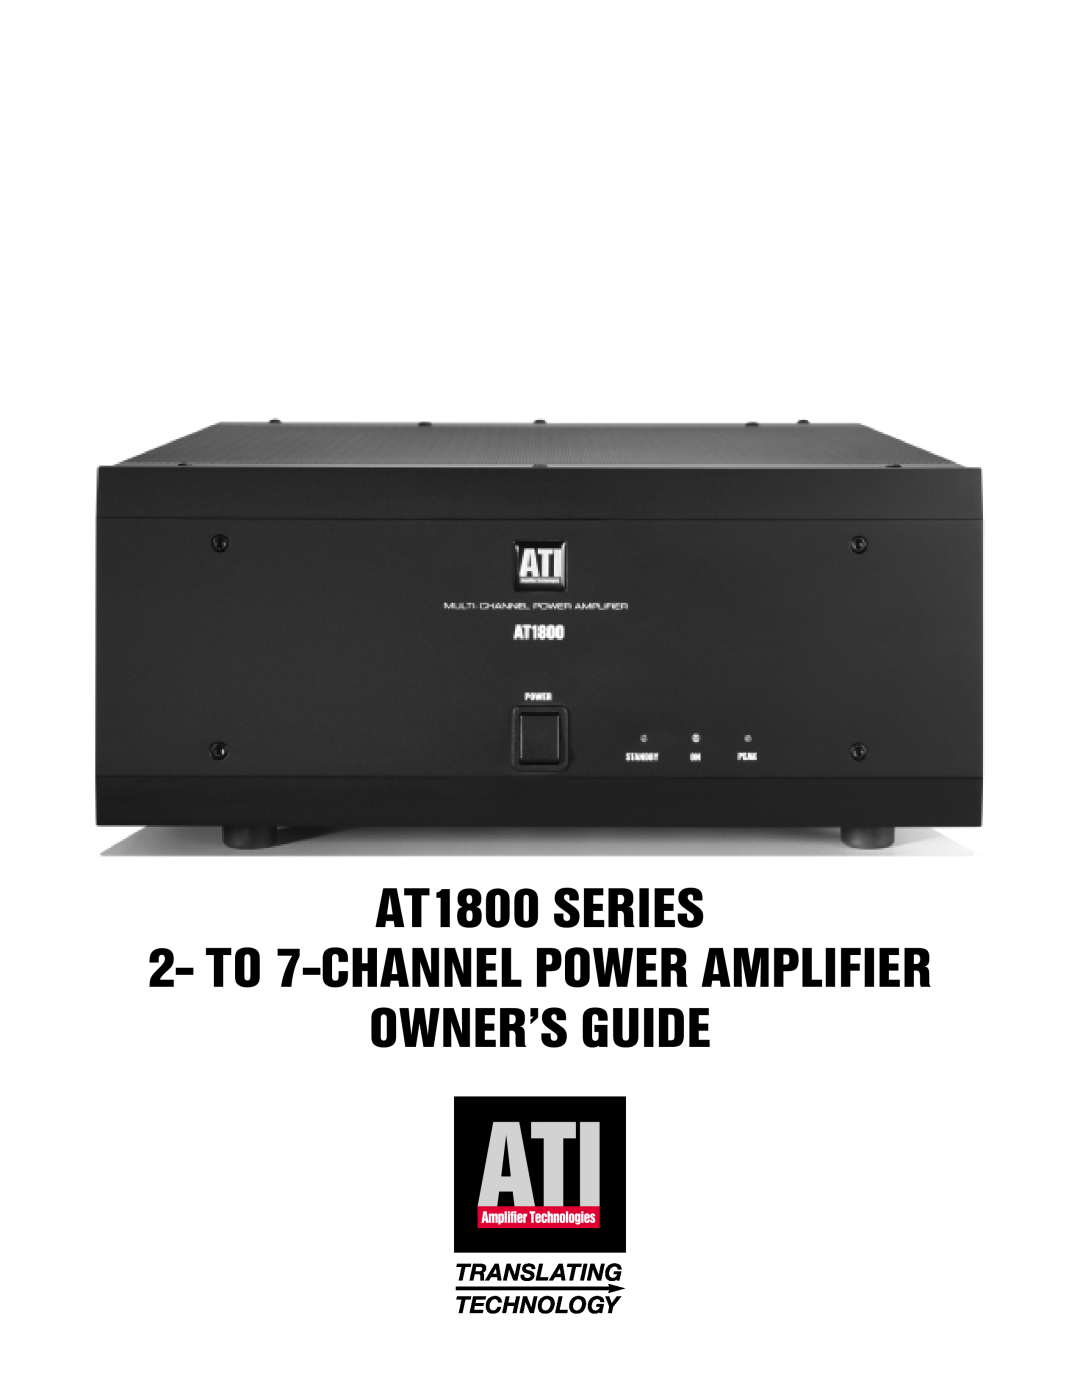 Amplifier Tech AT1800 Series manual AT1800 SERIES, Owner’S Guide, TO 7-CHANNELPOWER AMPLIFIER, Translating, Technology 